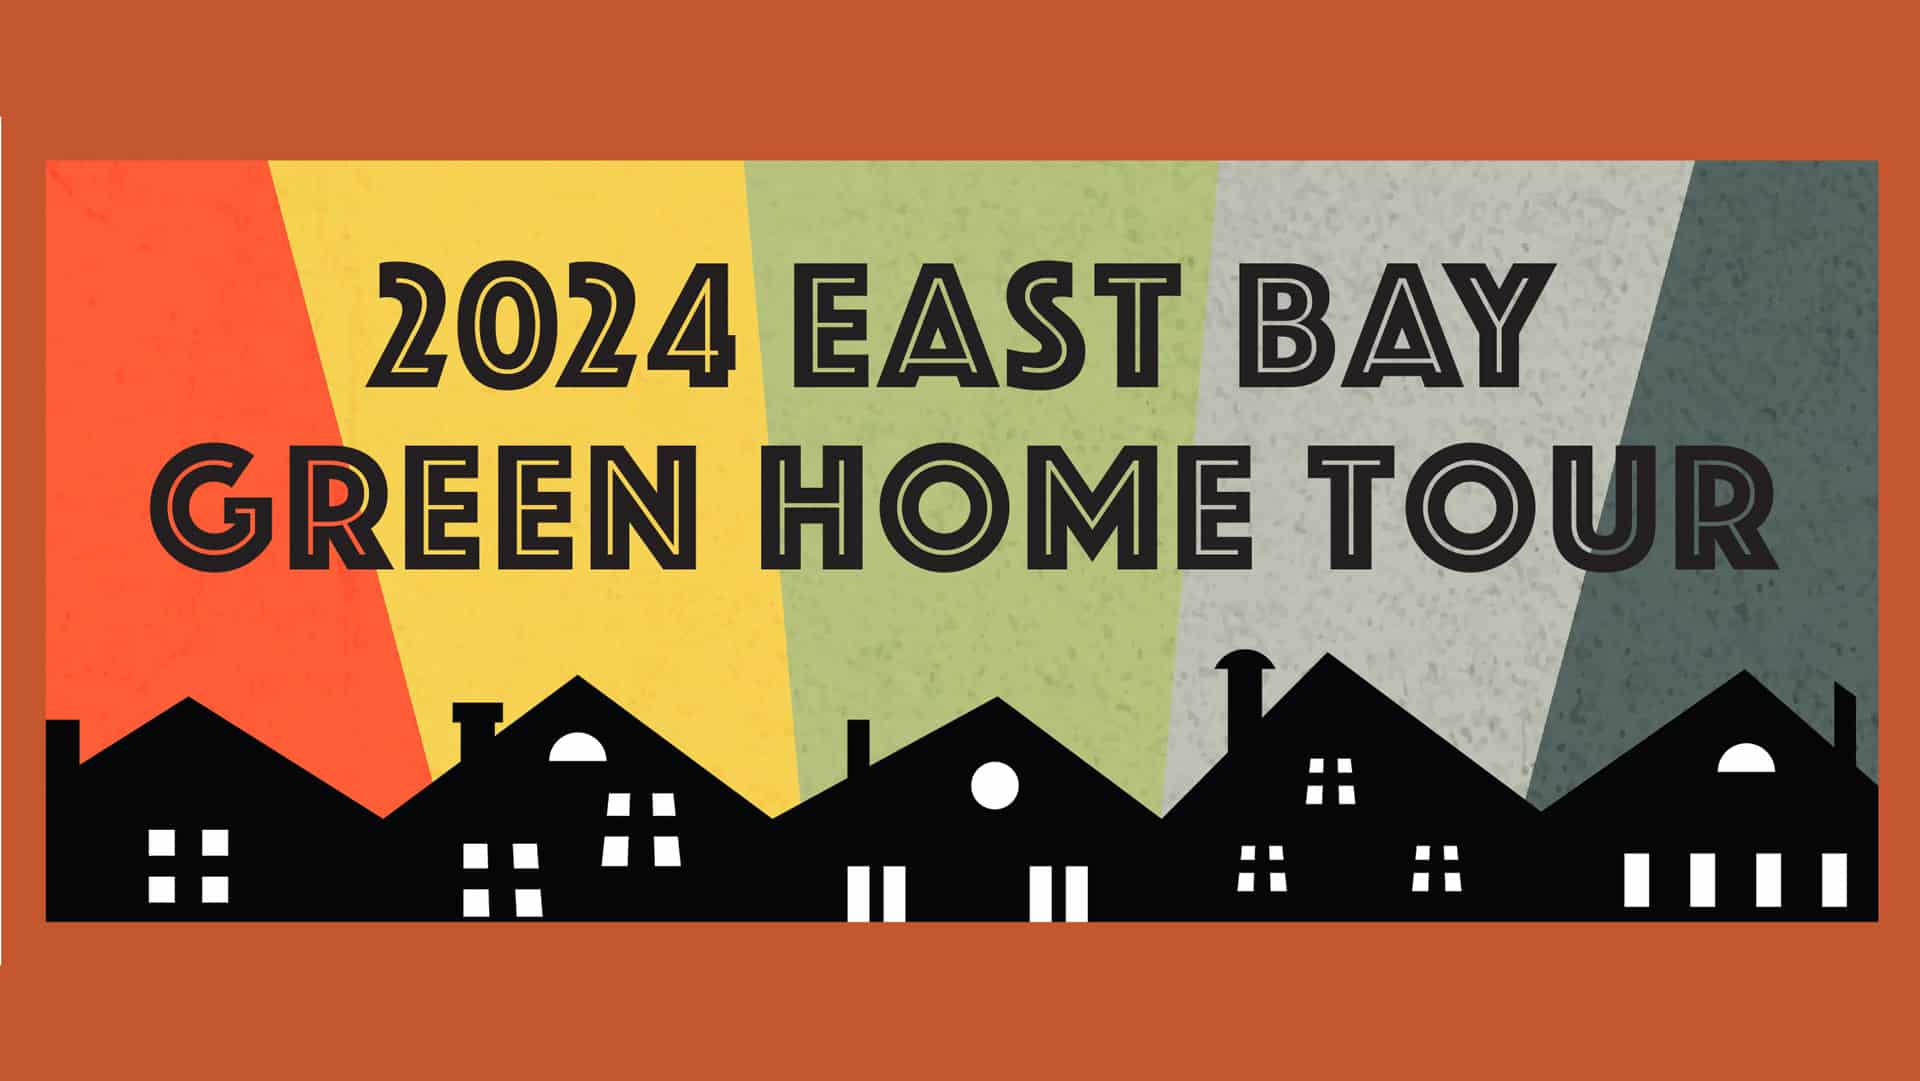 East Bay Green Home Tour